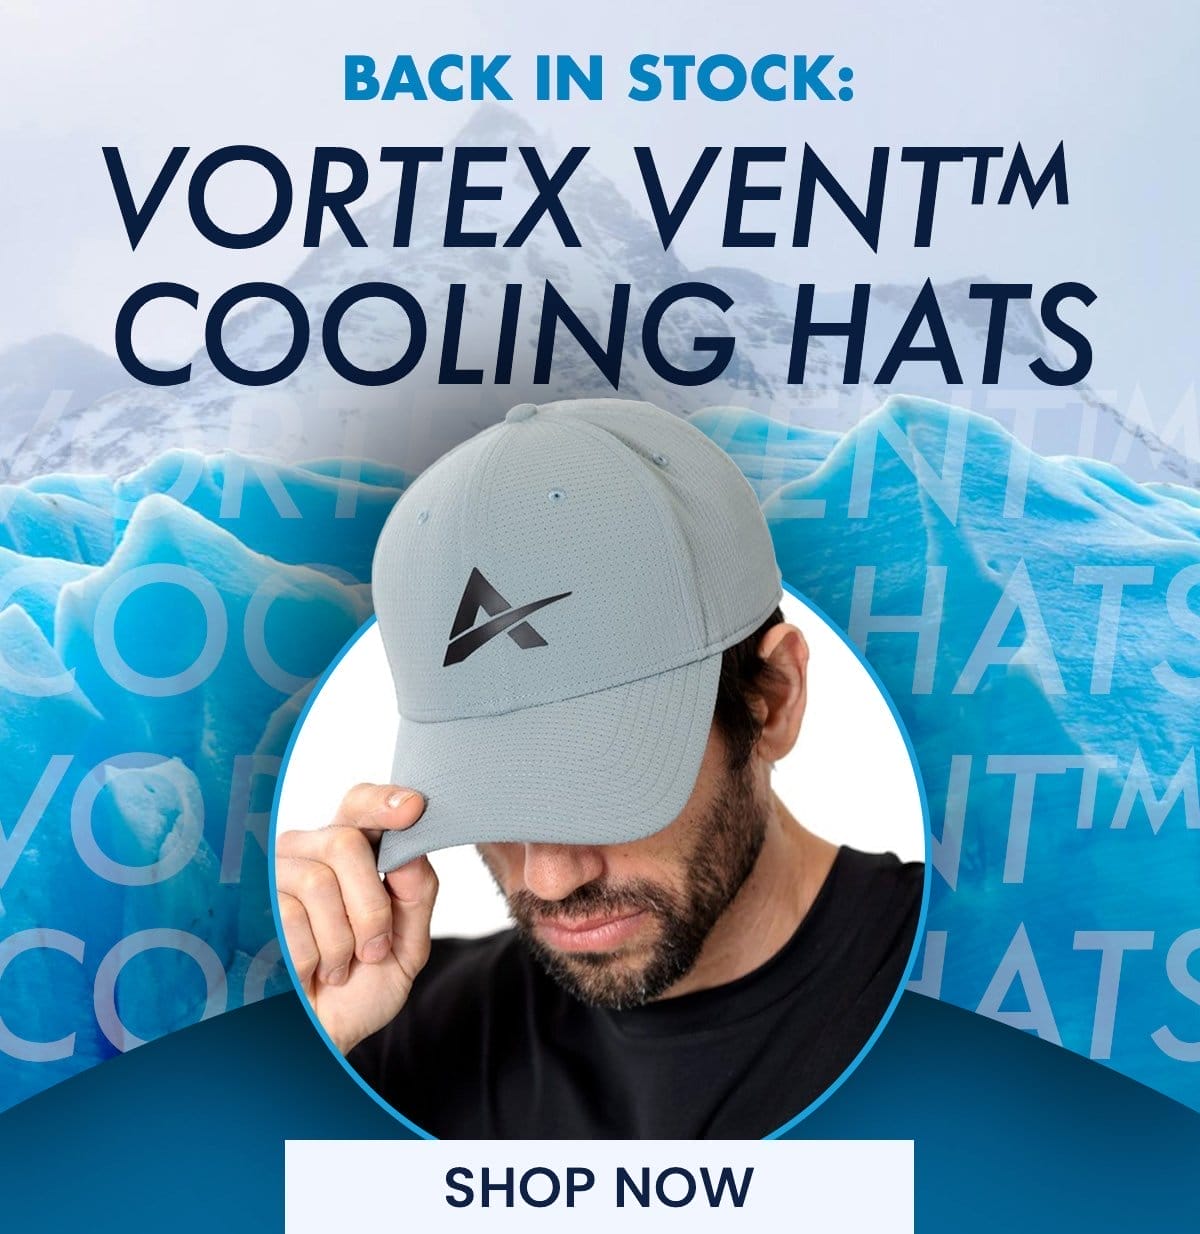 BACK IN STOCK: VORTEX VENT™ COOLING HATS